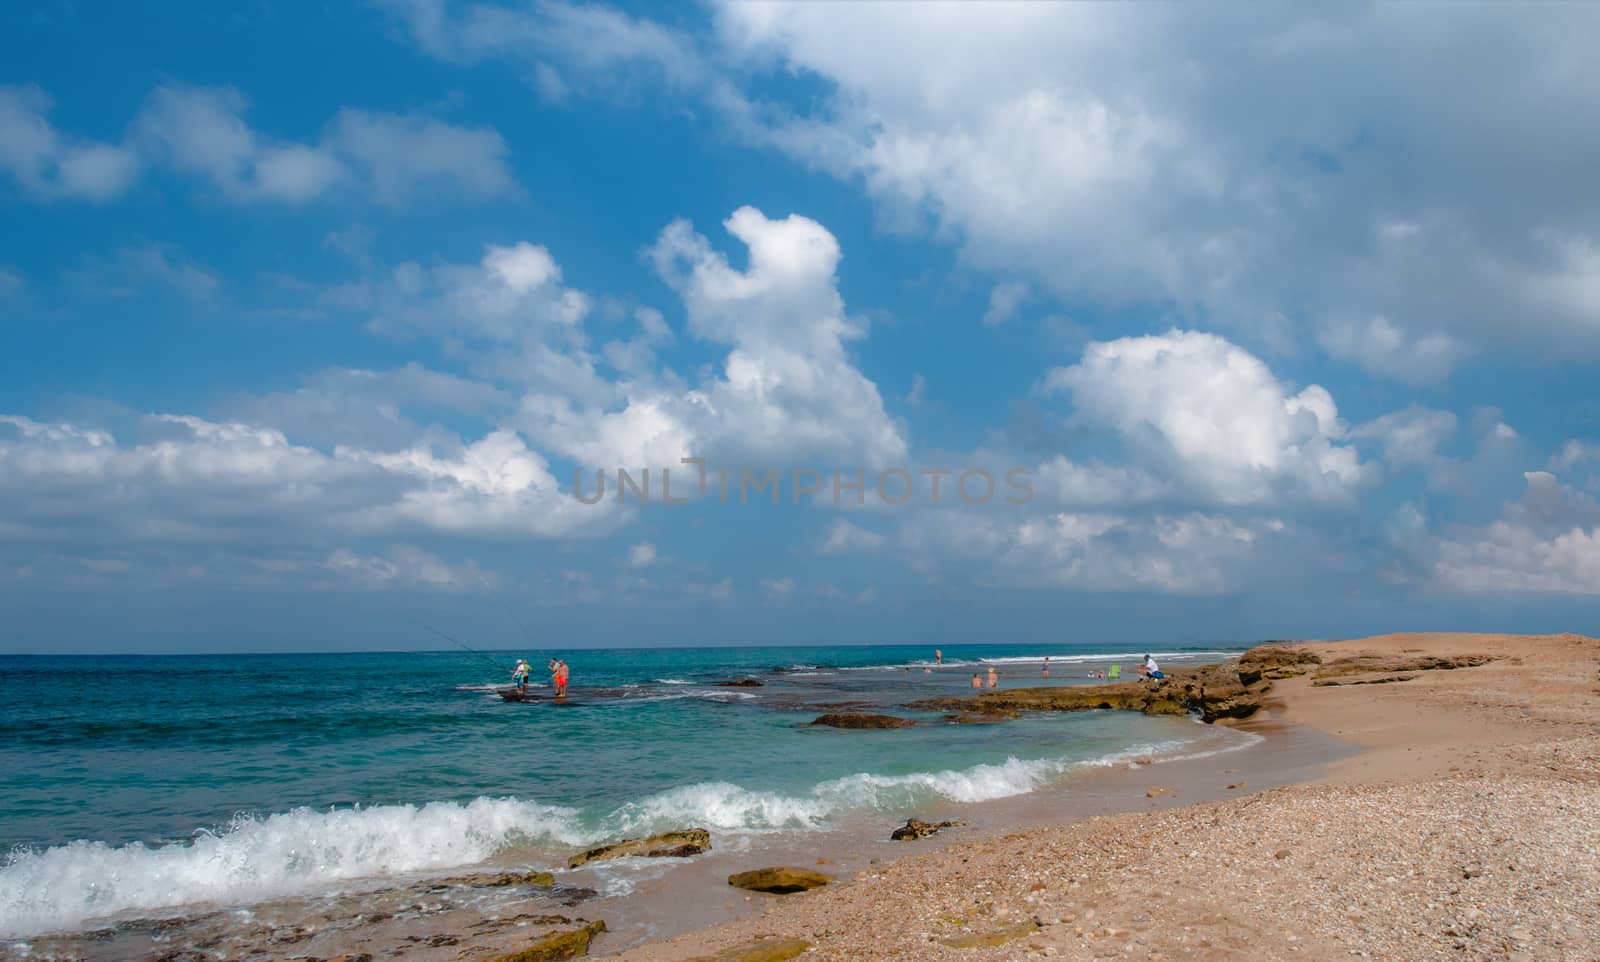 On a fine day, the fishermen under the white clouds rest on a wild, sea beach